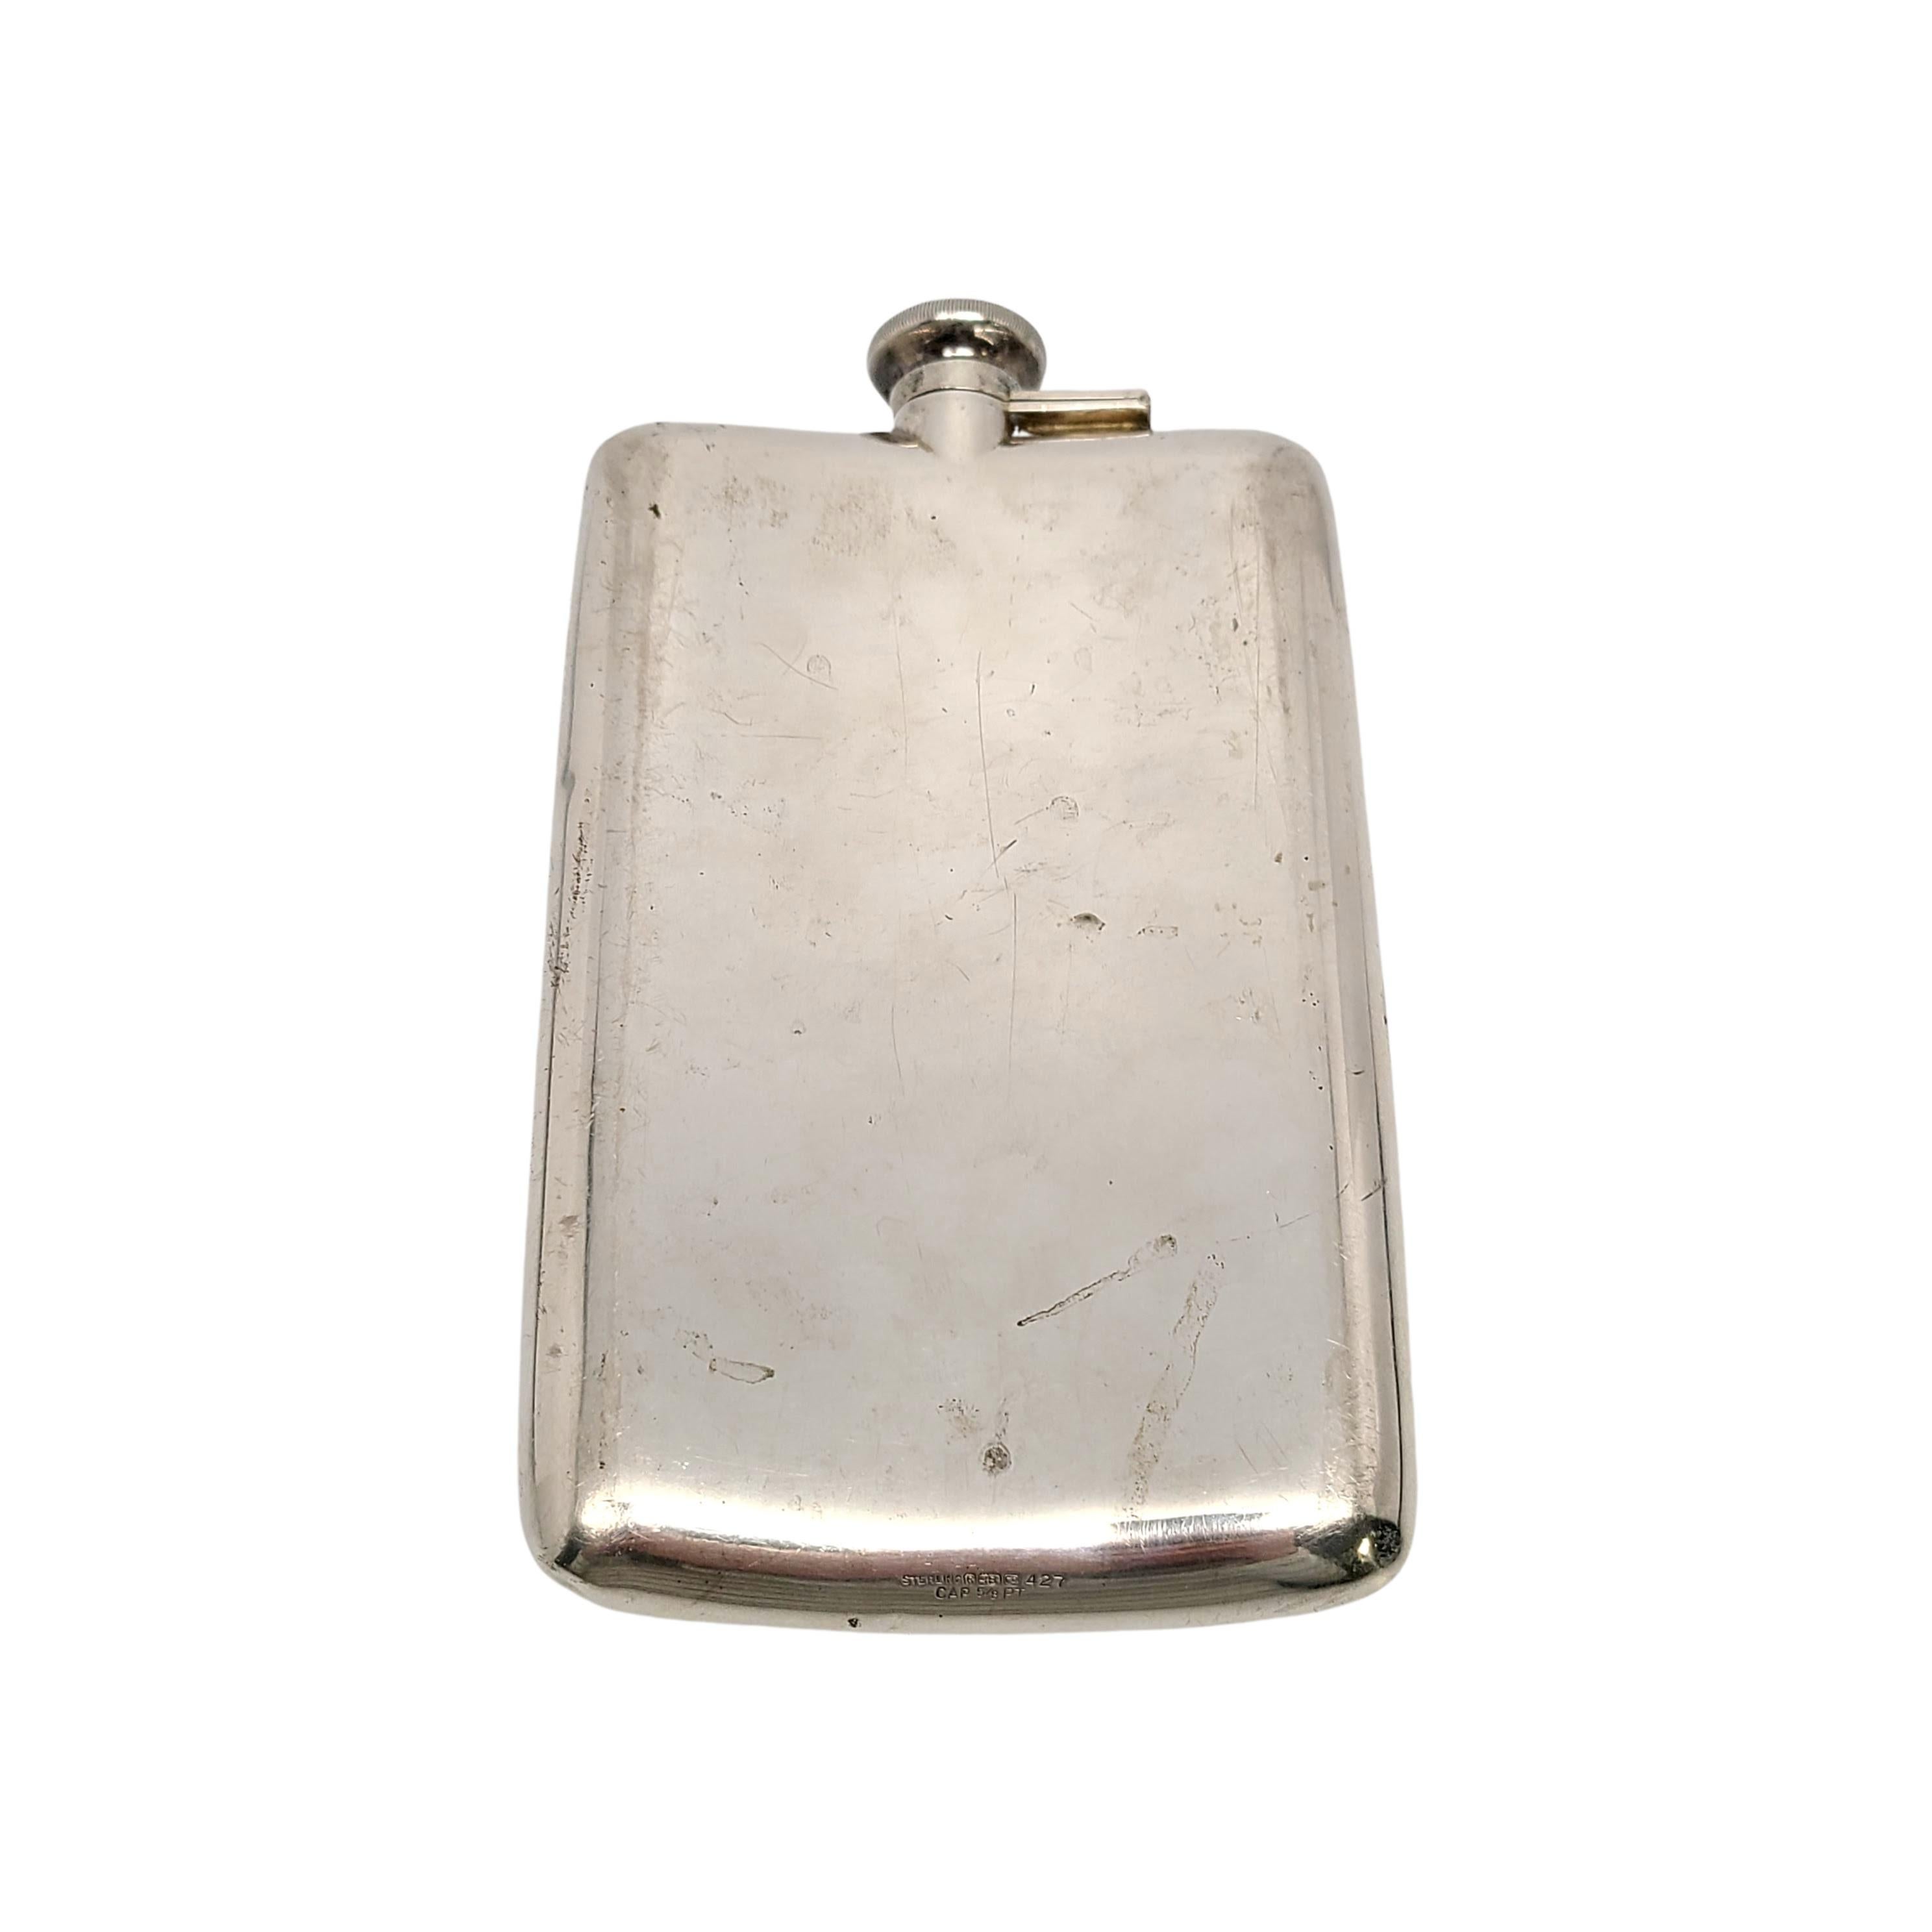 Sterling silver large  flask by R. Blackinton & Co.

No monogram

The streamlined mid-century design flask has a screw top with original inner cork. Hold 5/8 pint.

Measures 7 1/8